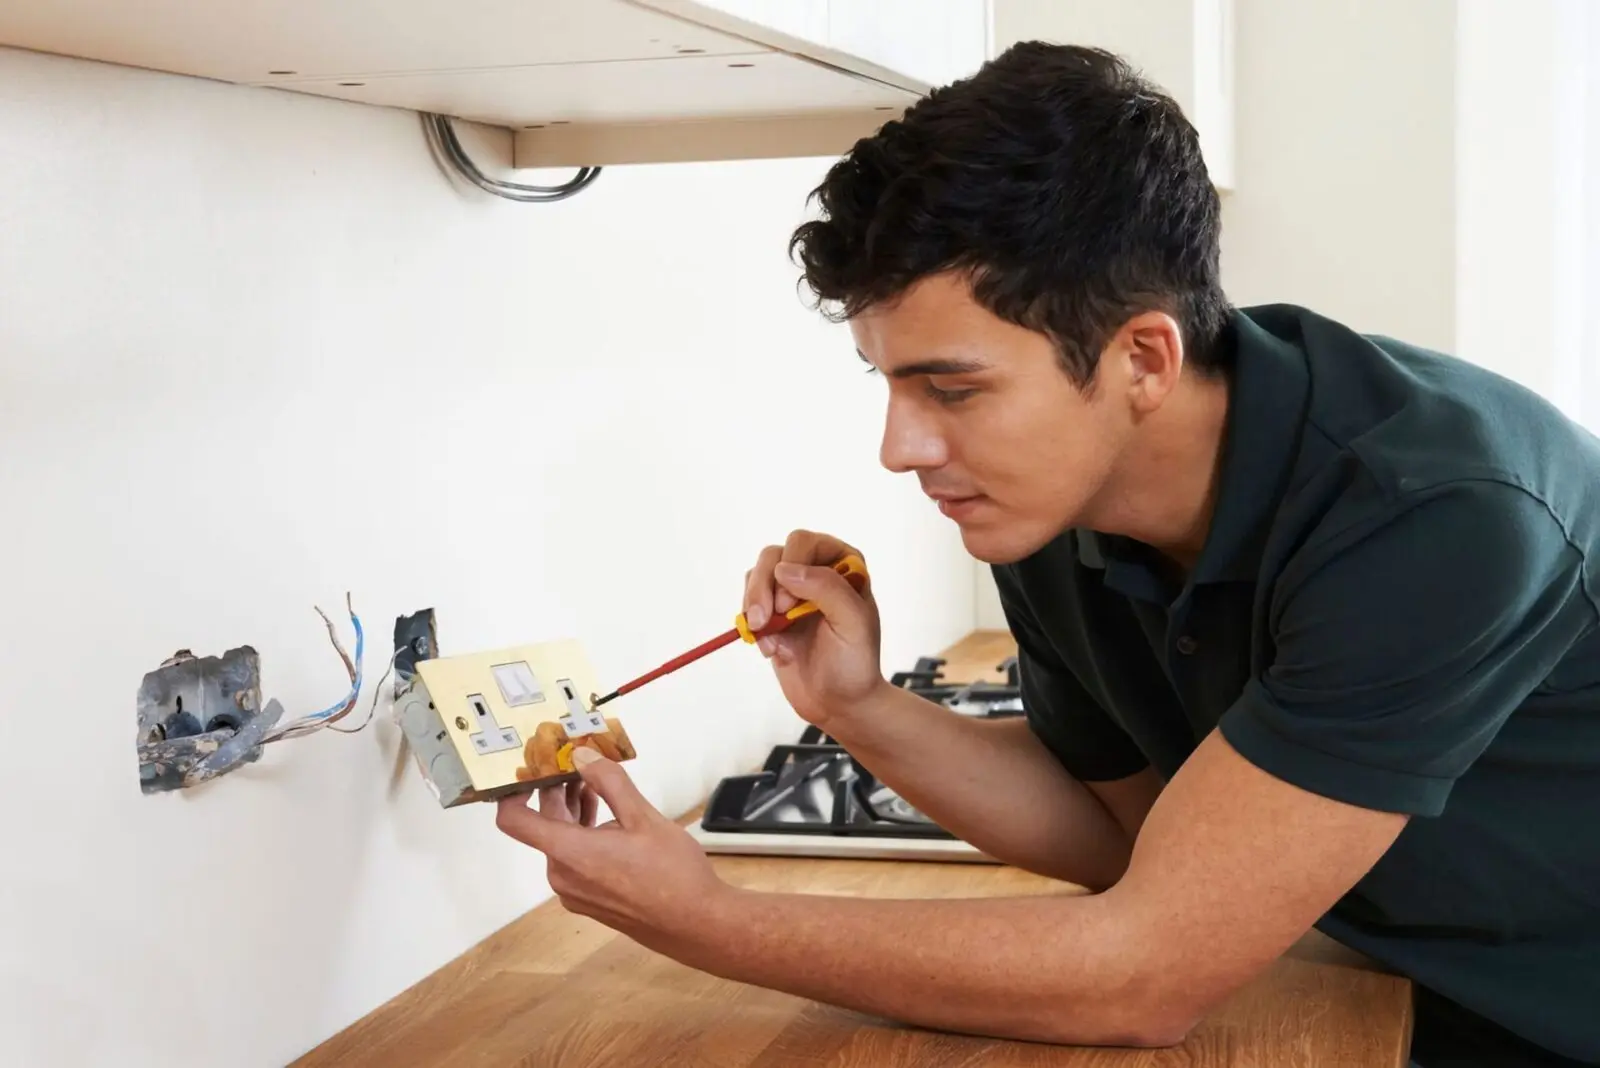 A man performing a do-it-yourself project in a kitchen by working on a light switch.